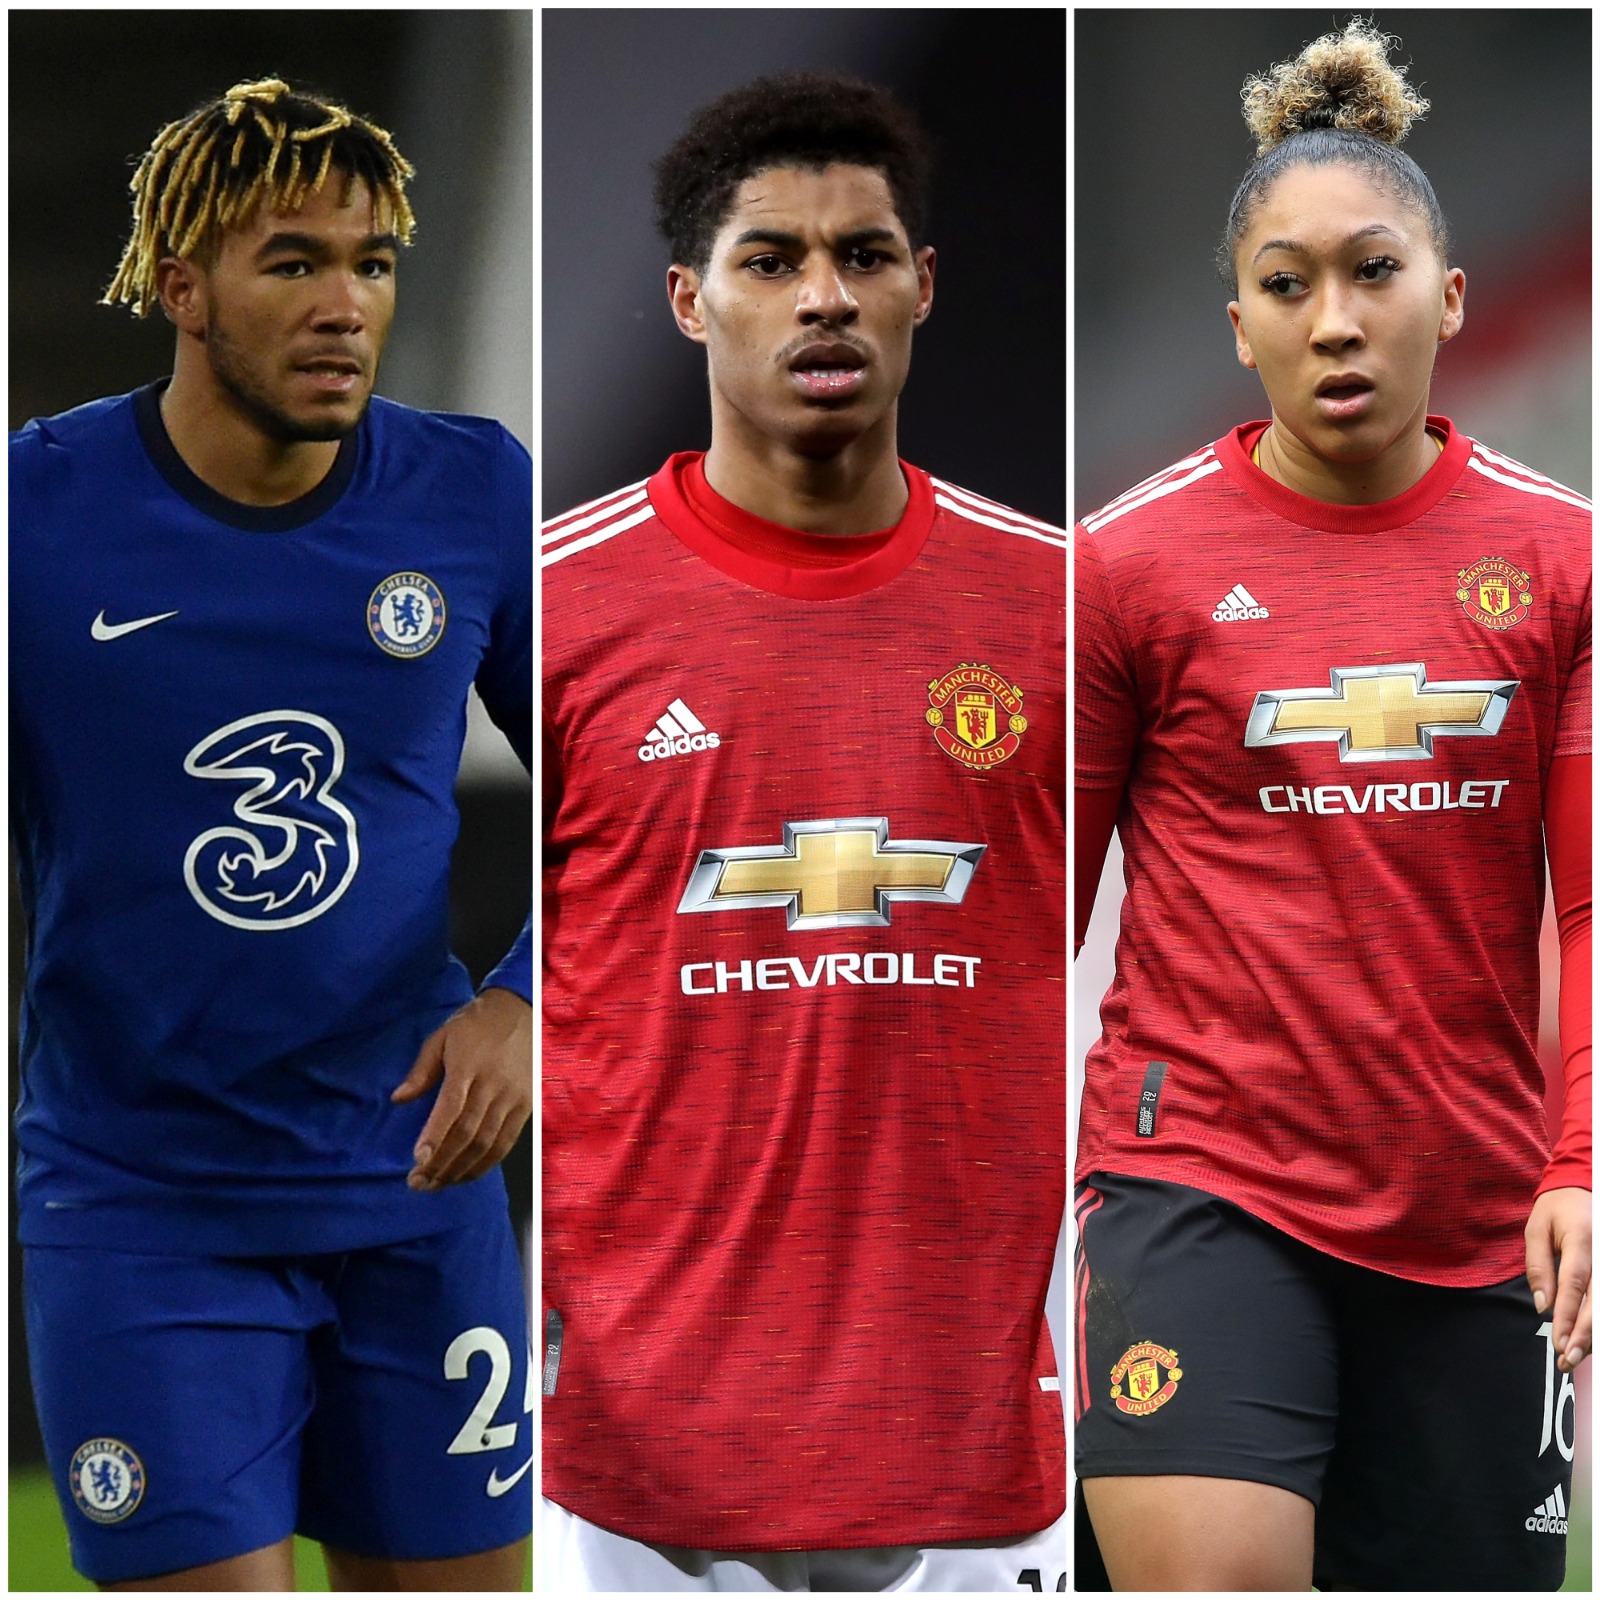 Reece James, Marcus Rashford and Lauren James have all received abuse on social media